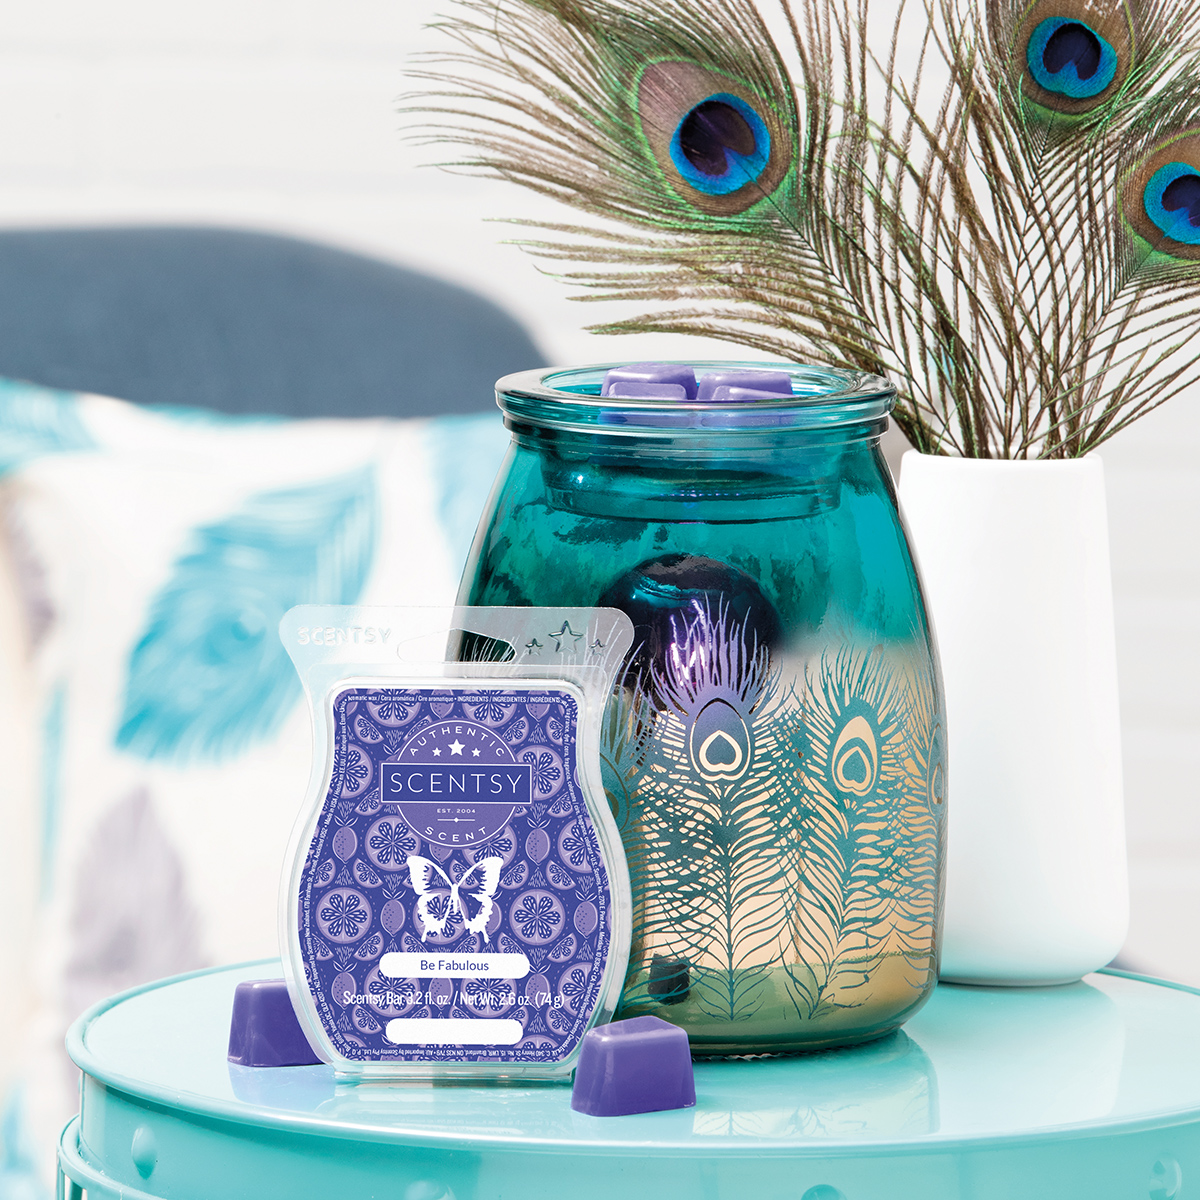 Be Bold Peacock Scentsy Warmer April 2020 Warmer The Safest Candles